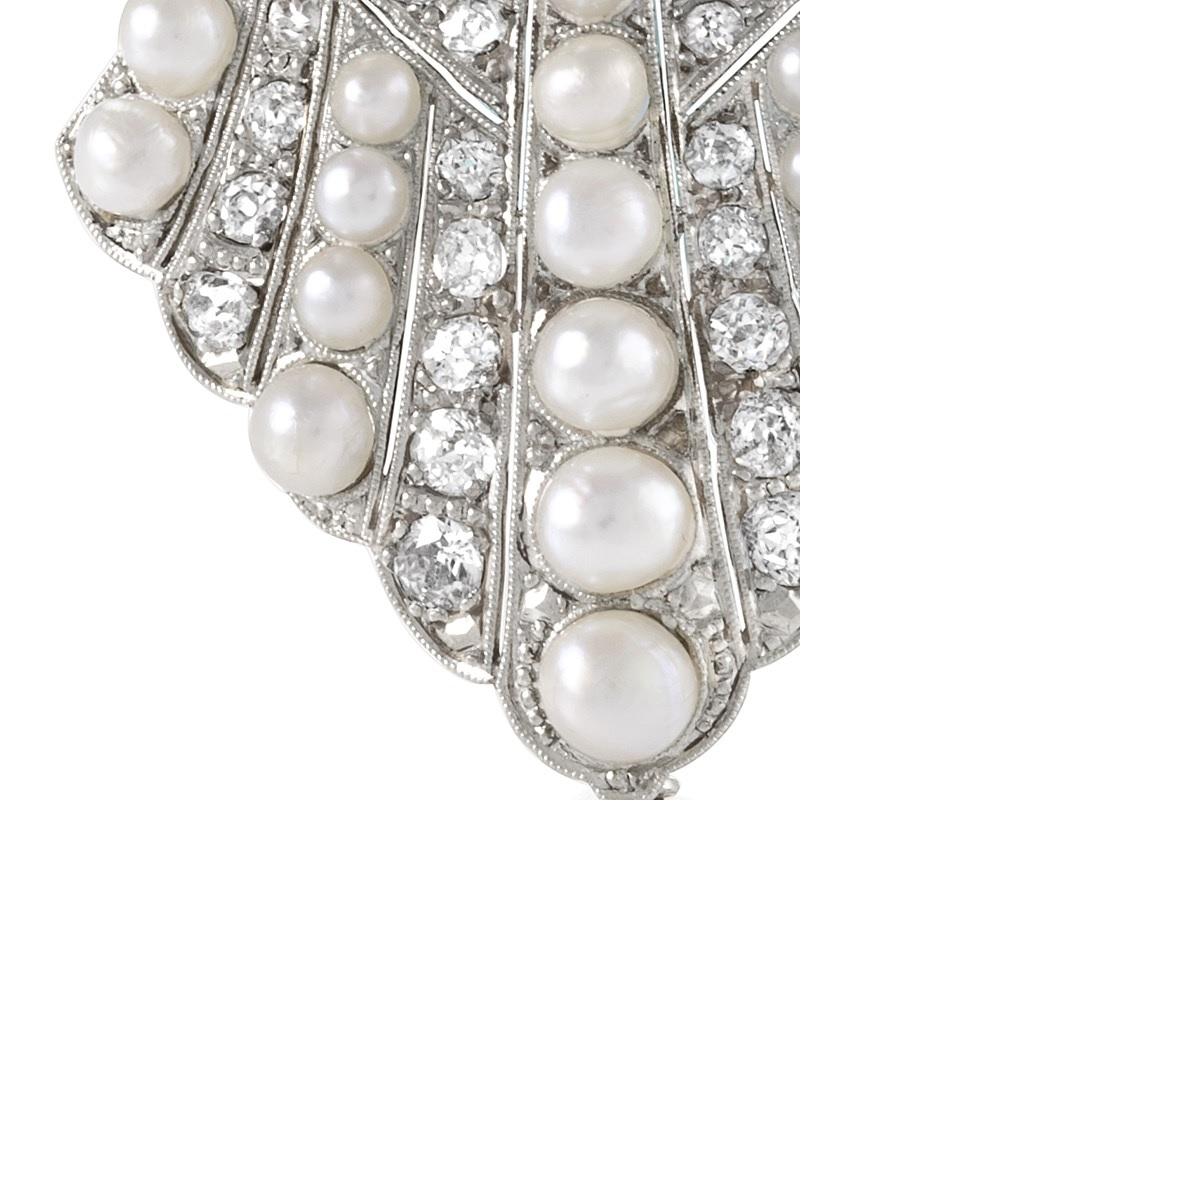 An Art Deco brooch in platinum with diamonds and pearls. The brooch has 54 Old European- and rose-cut diamonds with an approximate total weight of 3.2 carats and a large center old mine-cut stone with an approximate total weight of 1.25 carats. The